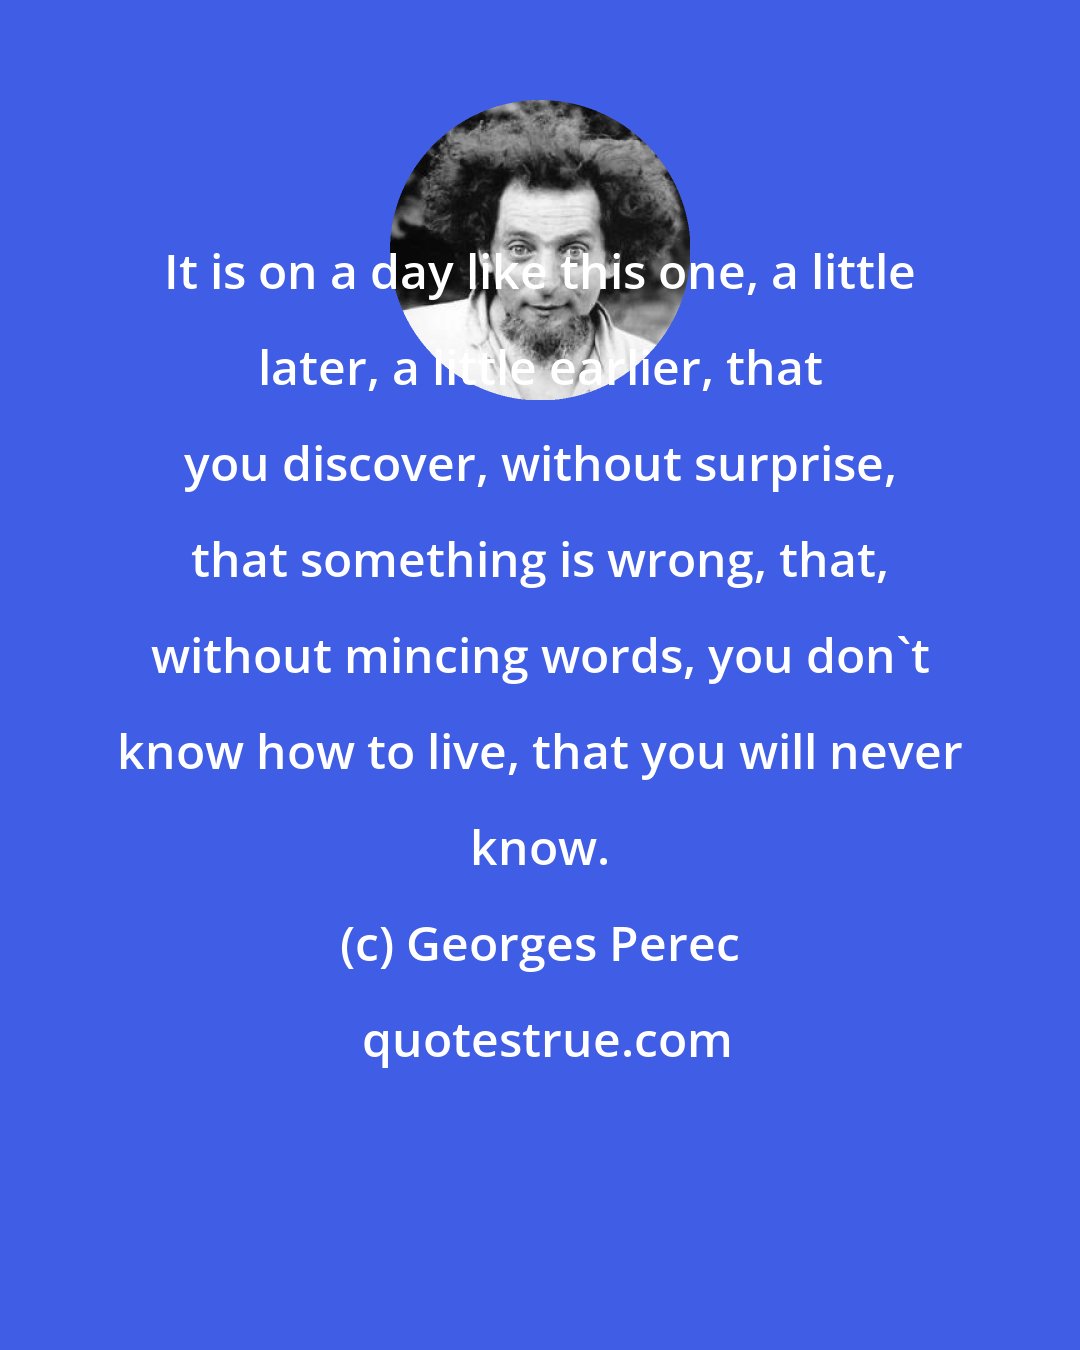 Georges Perec: It is on a day like this one, a little later, a little earlier, that you discover, without surprise, that something is wrong, that, without mincing words, you don't know how to live, that you will never know.